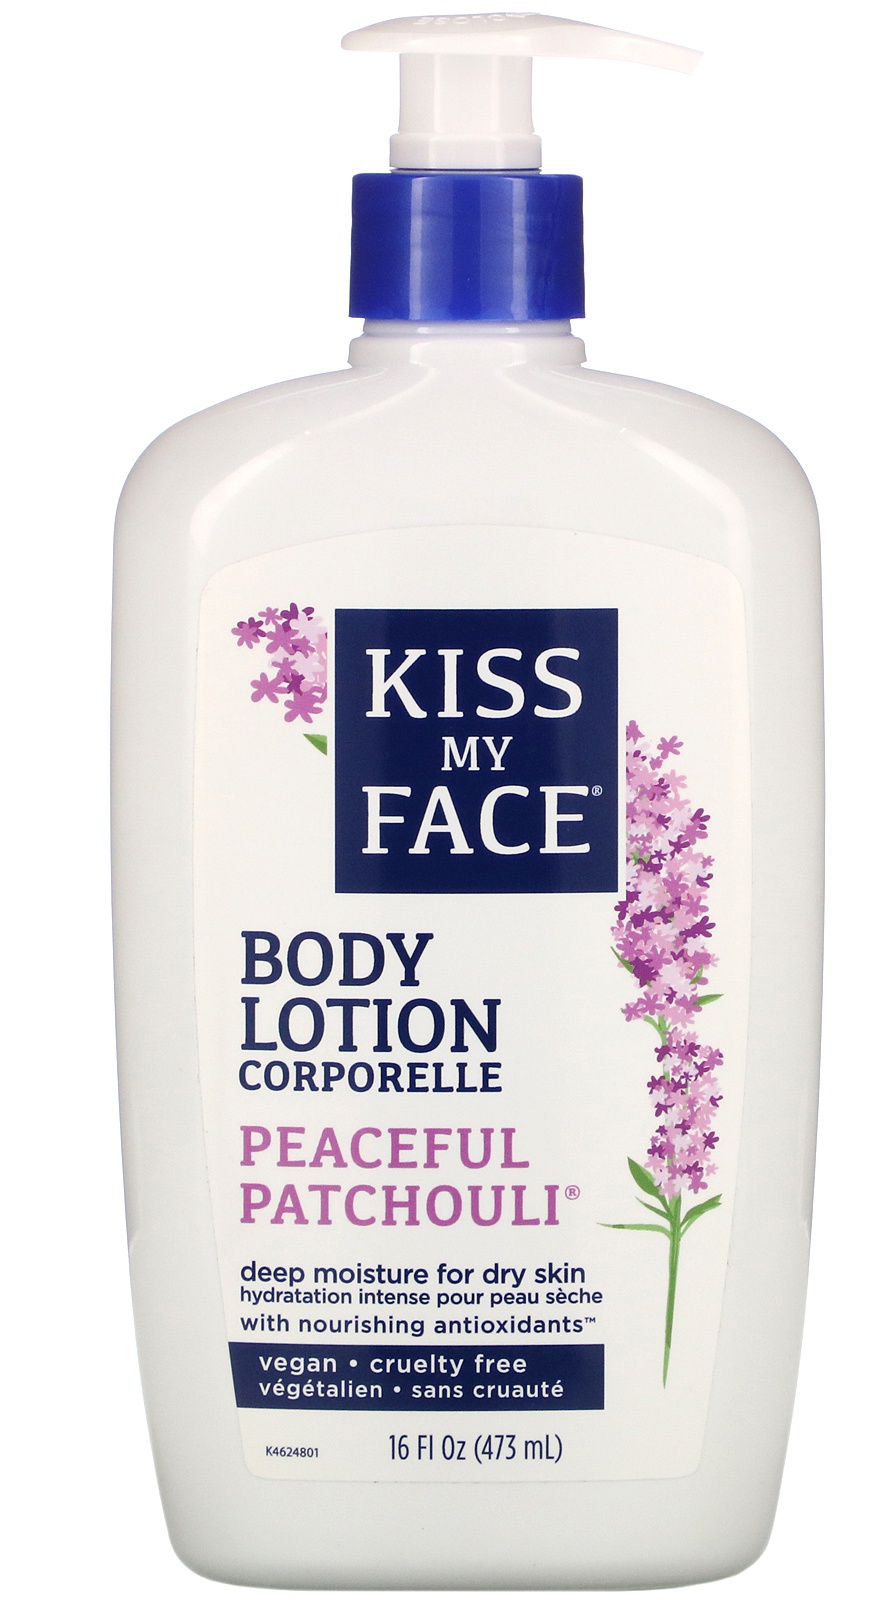 Kiss My Face Body Lotion, Peaceful Patchouli